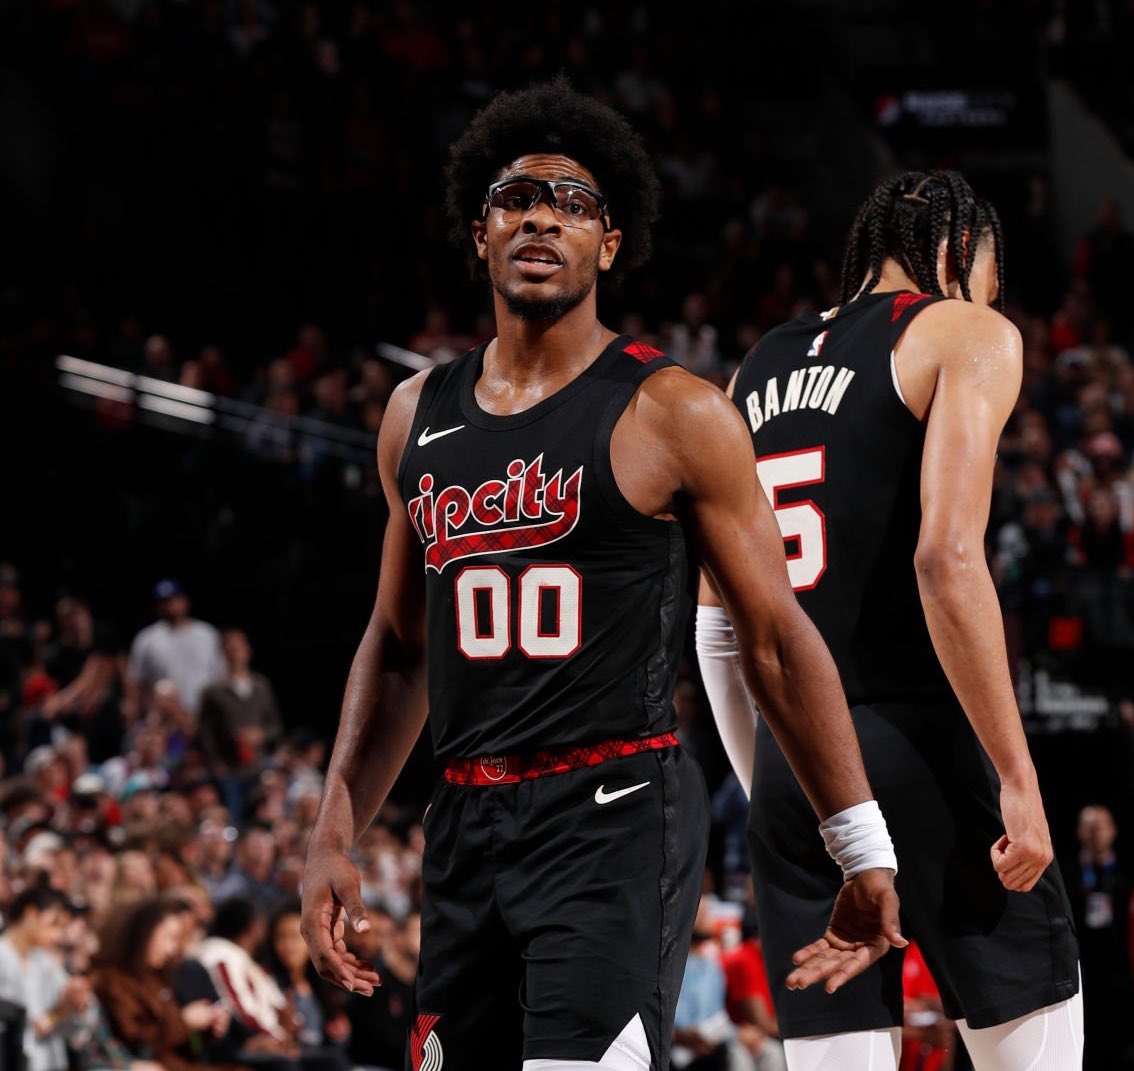 Scoot Henderson Friday night:

30 PTS
5 REB
7 AST 
1 TOV
6/7 3PT

The 20-year-old has averaged 19.2 PPG and 8.1 APG while shooting 39.7% on 6.0 3PA/G over his last 13 games

#RipCity